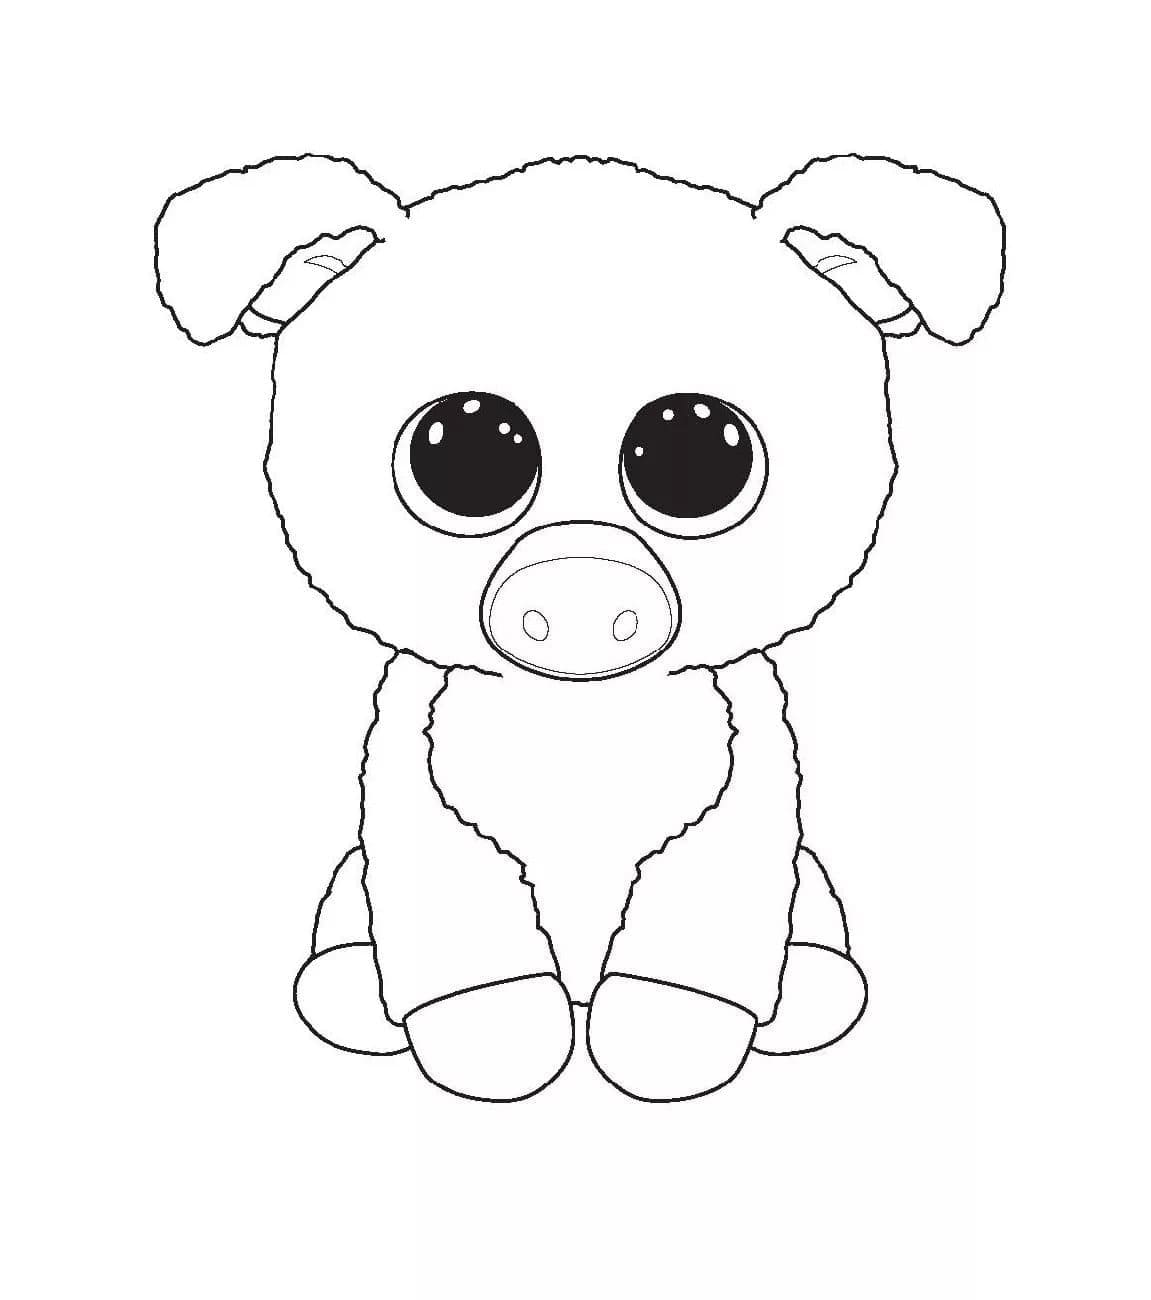 Beanie Boo Pig coloring page - Download, Print or Color Online for Free